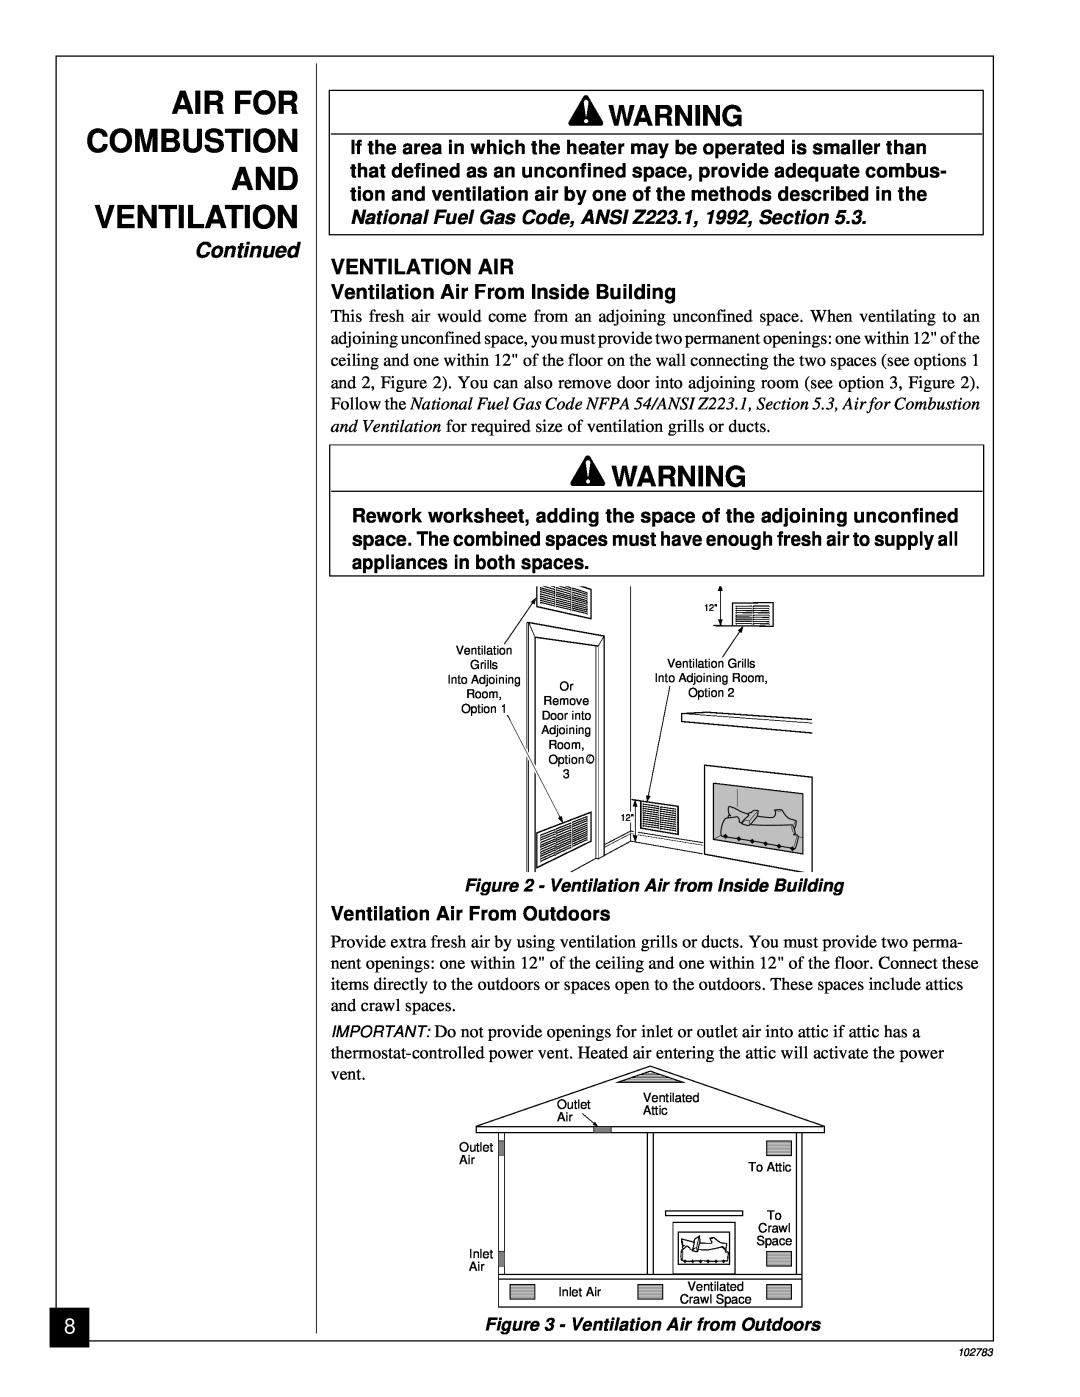 Desa 102783-01B installation manual Air For Combustion And Ventilation, Continued, Ventilation Air From Inside Building 